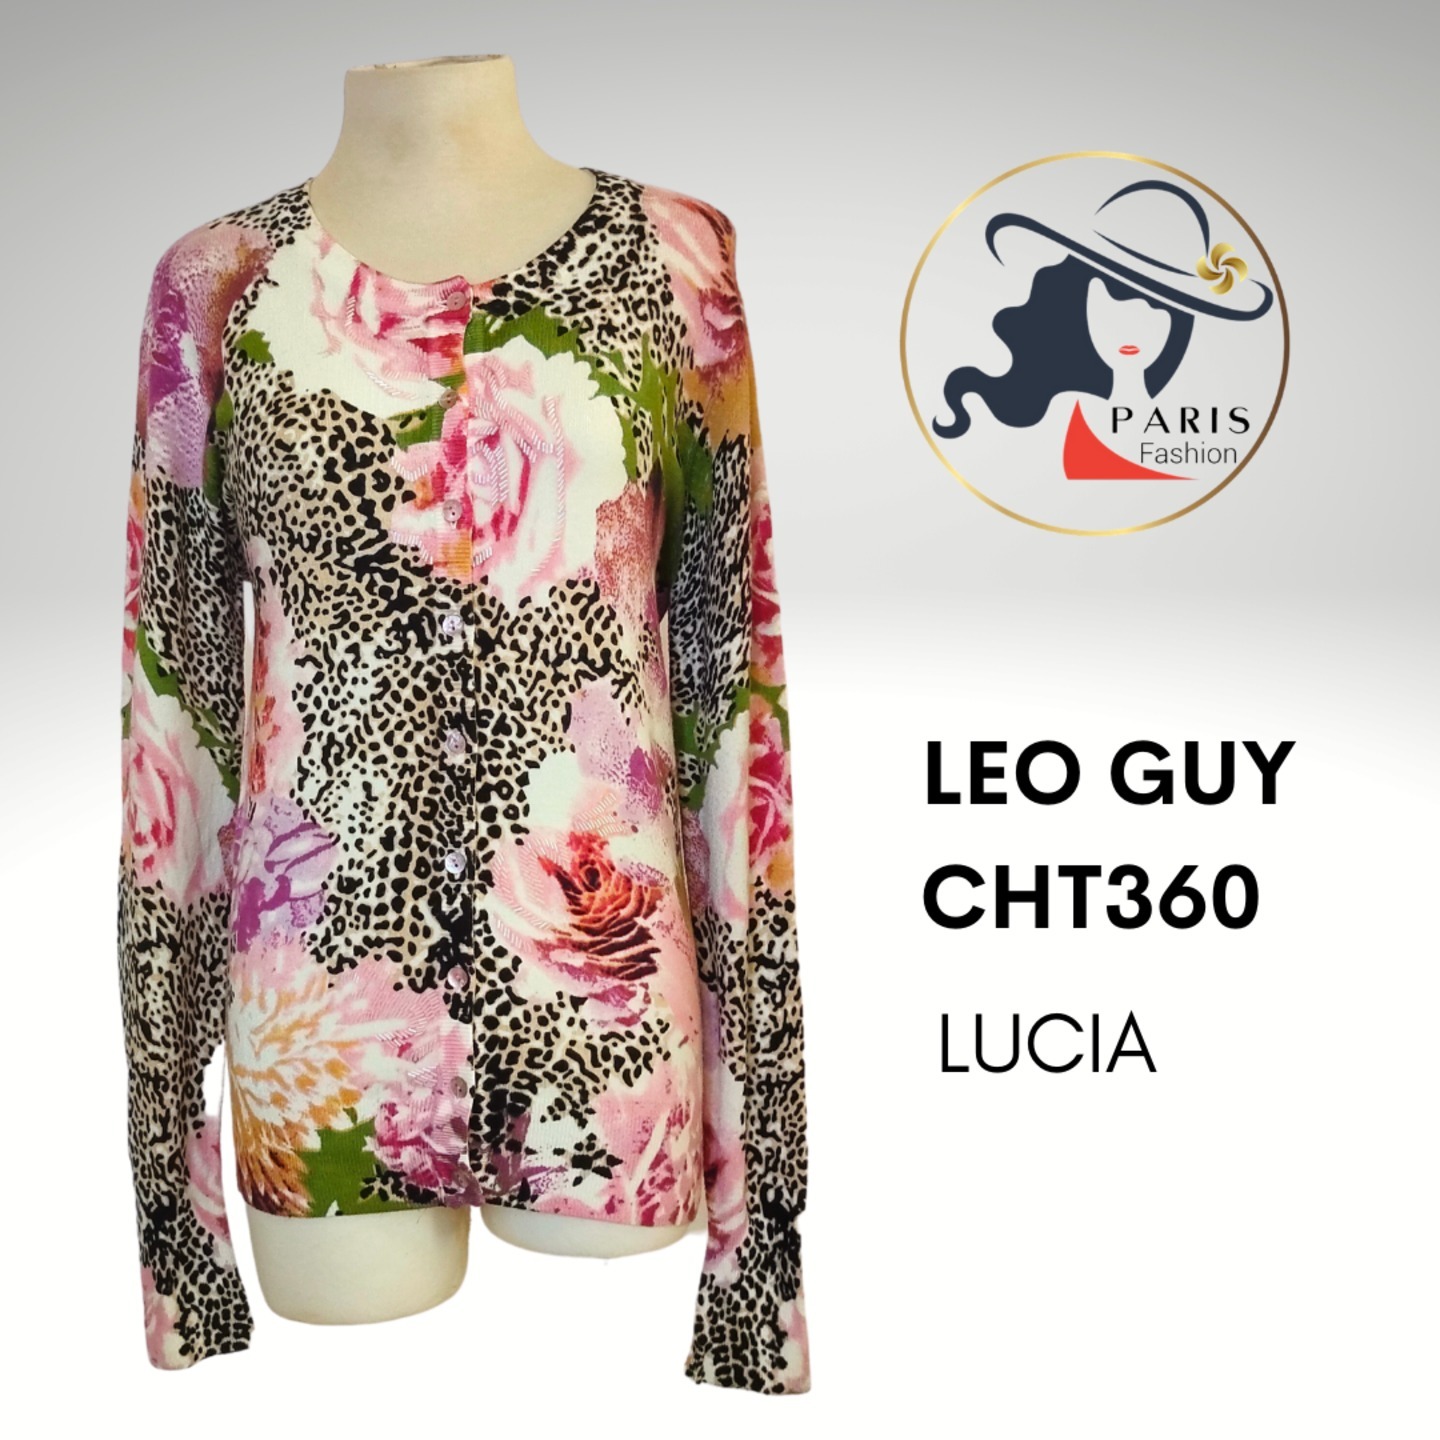 LEO GUY CHT360 FLORAL AND ANIMAL PRINT GILET WITH SEQUINS